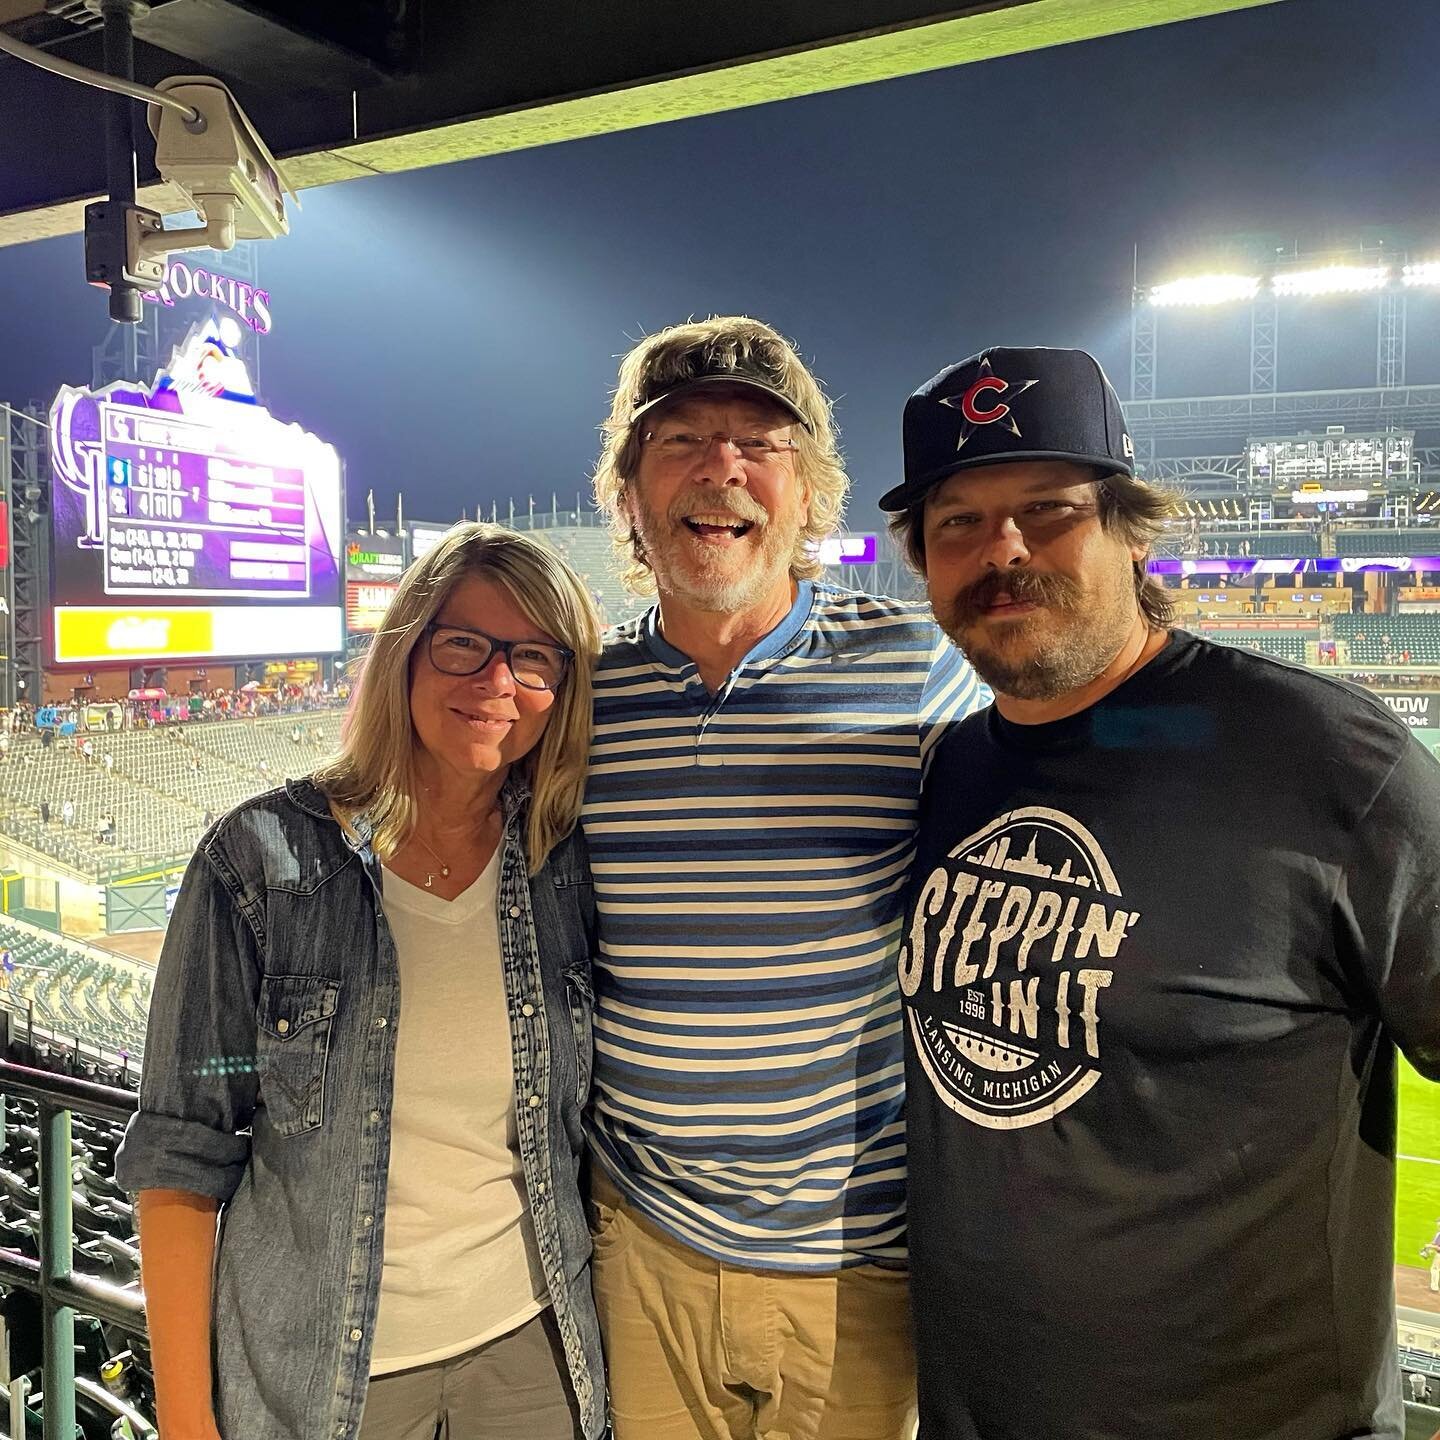 Greensky Newgrass! Hey music lovers, this is what CAN happen when you get vaccinated; baseball games with friends and playing music festivals again.  Me, Lynn and Dave Bruzza of @greenskybluegrass enjoyed a @rockies game together Tuesday night and wh